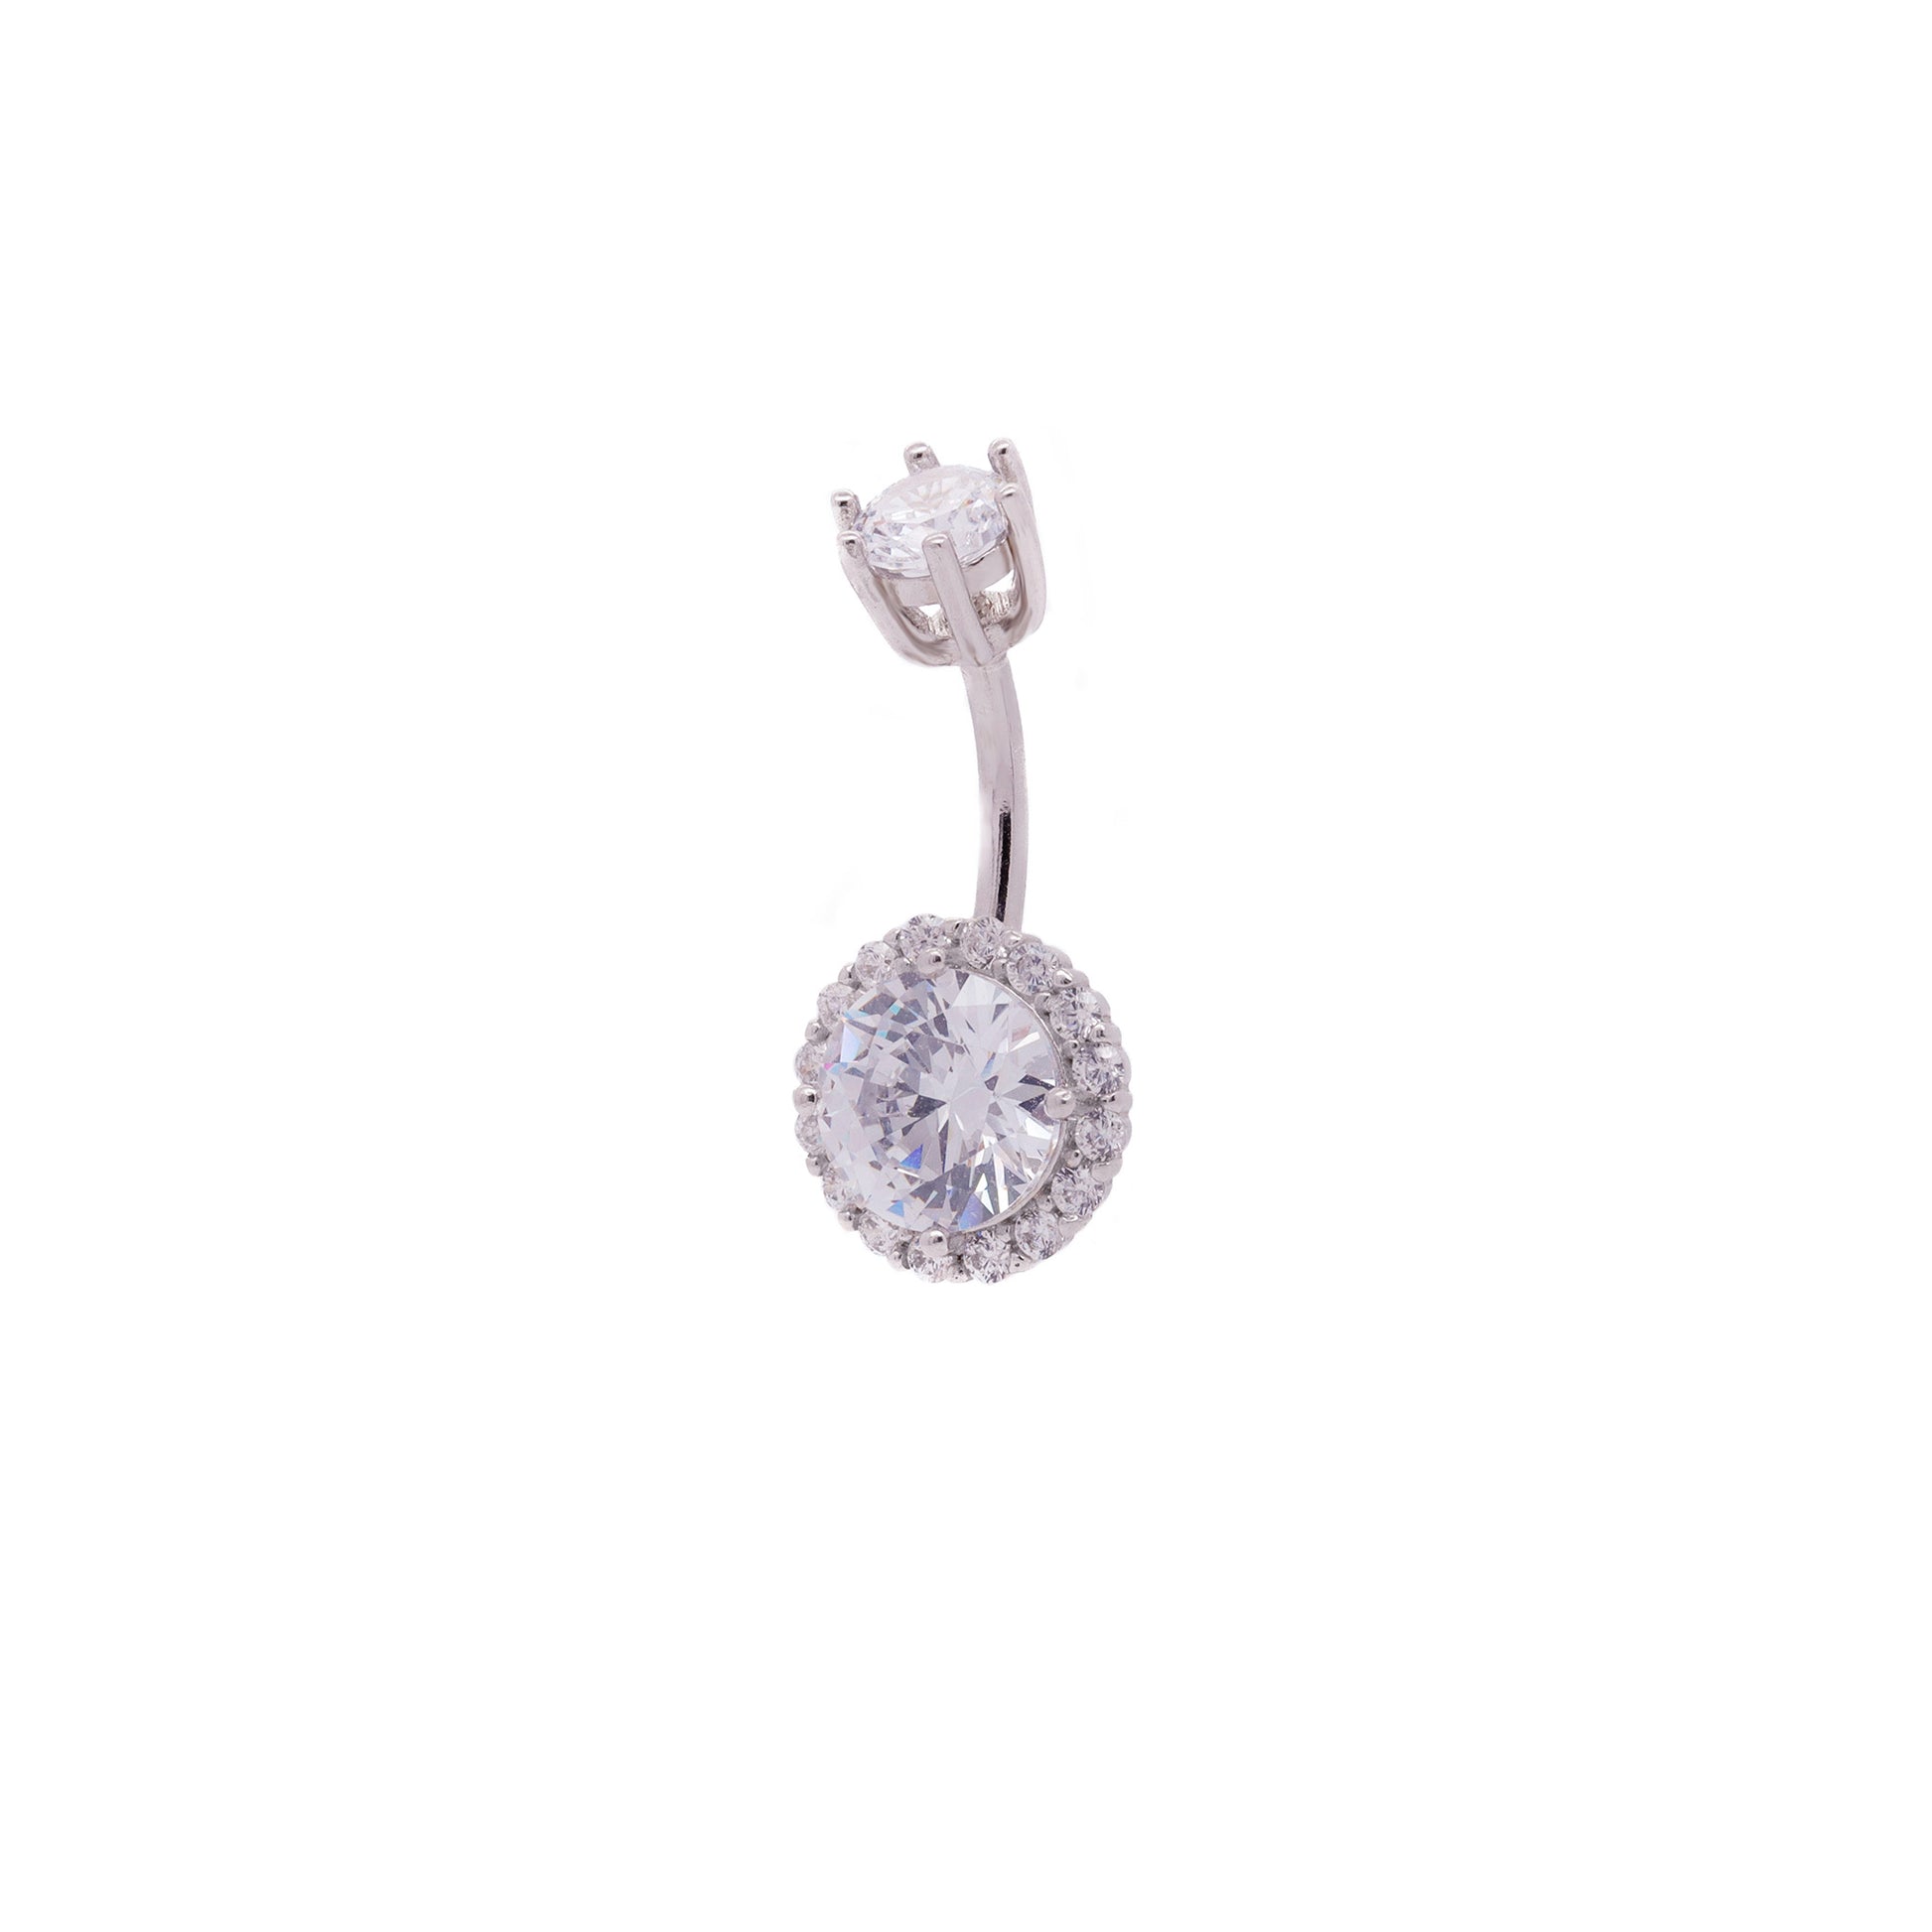 Solid 925 Silver | 14G Halo Belly Ring | 6mm 1/4" 8mm 5/16" 10mm 3/8" - Sturdy South